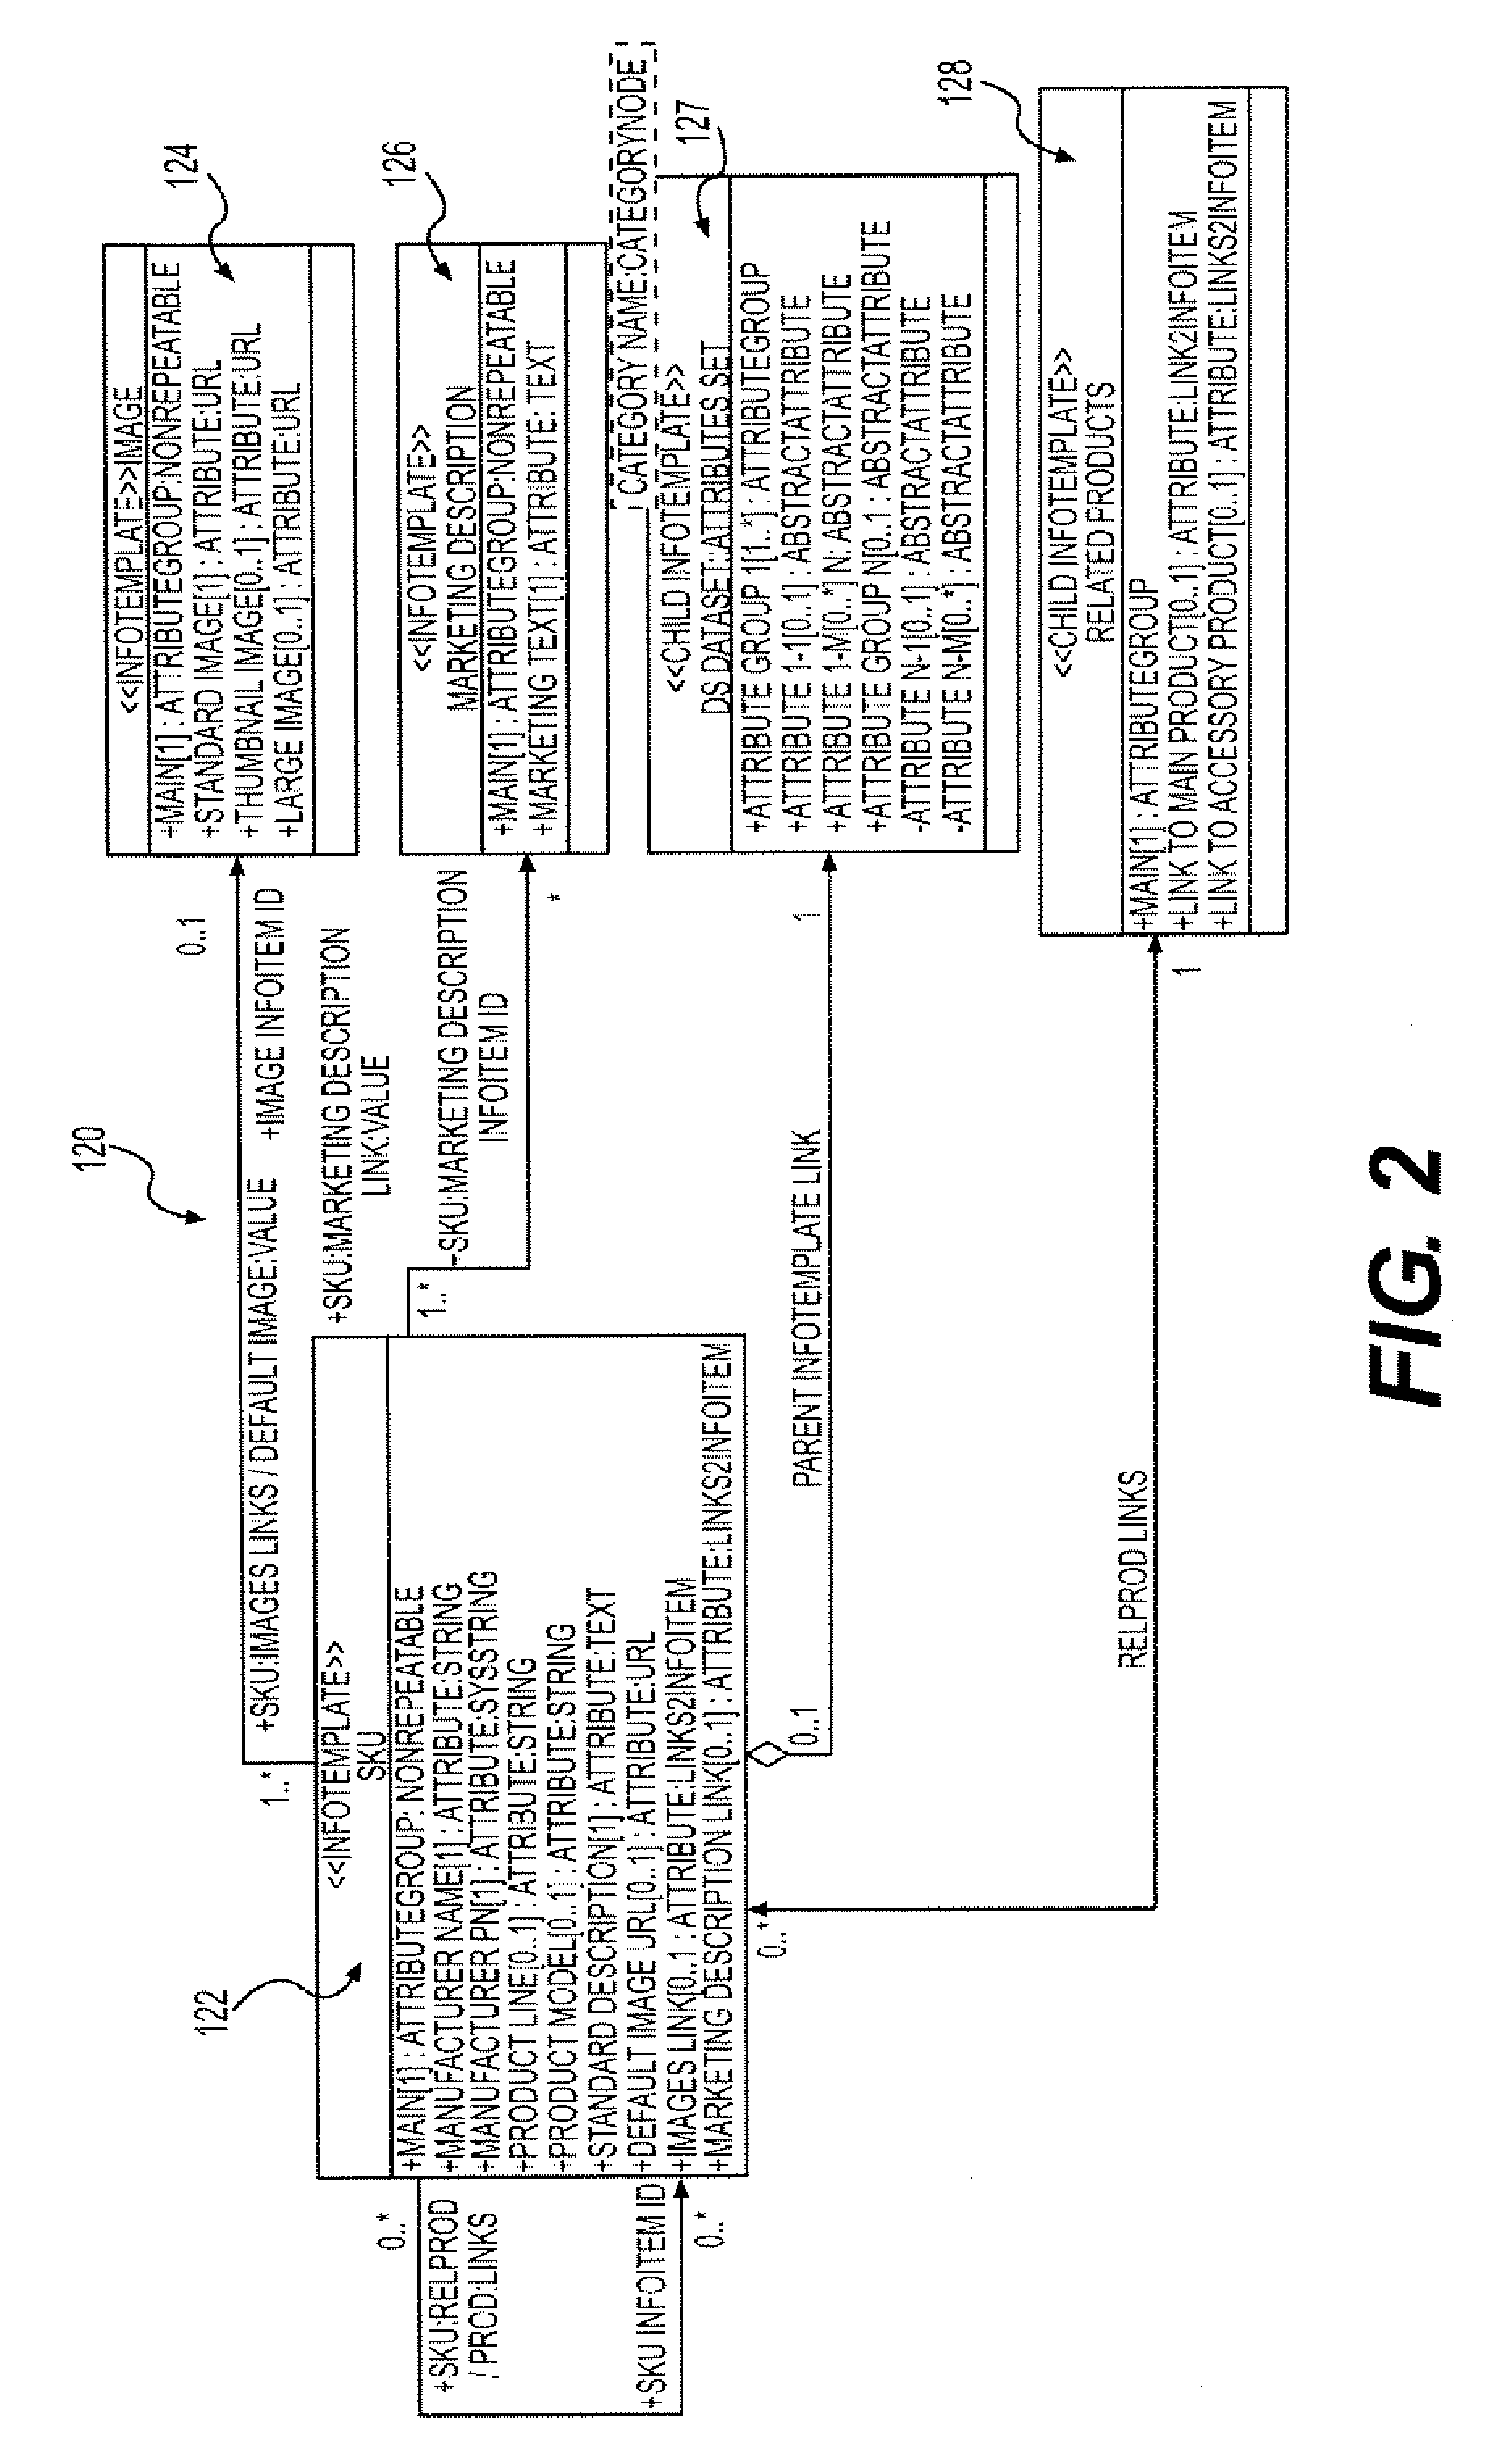 Product catalog management system and method